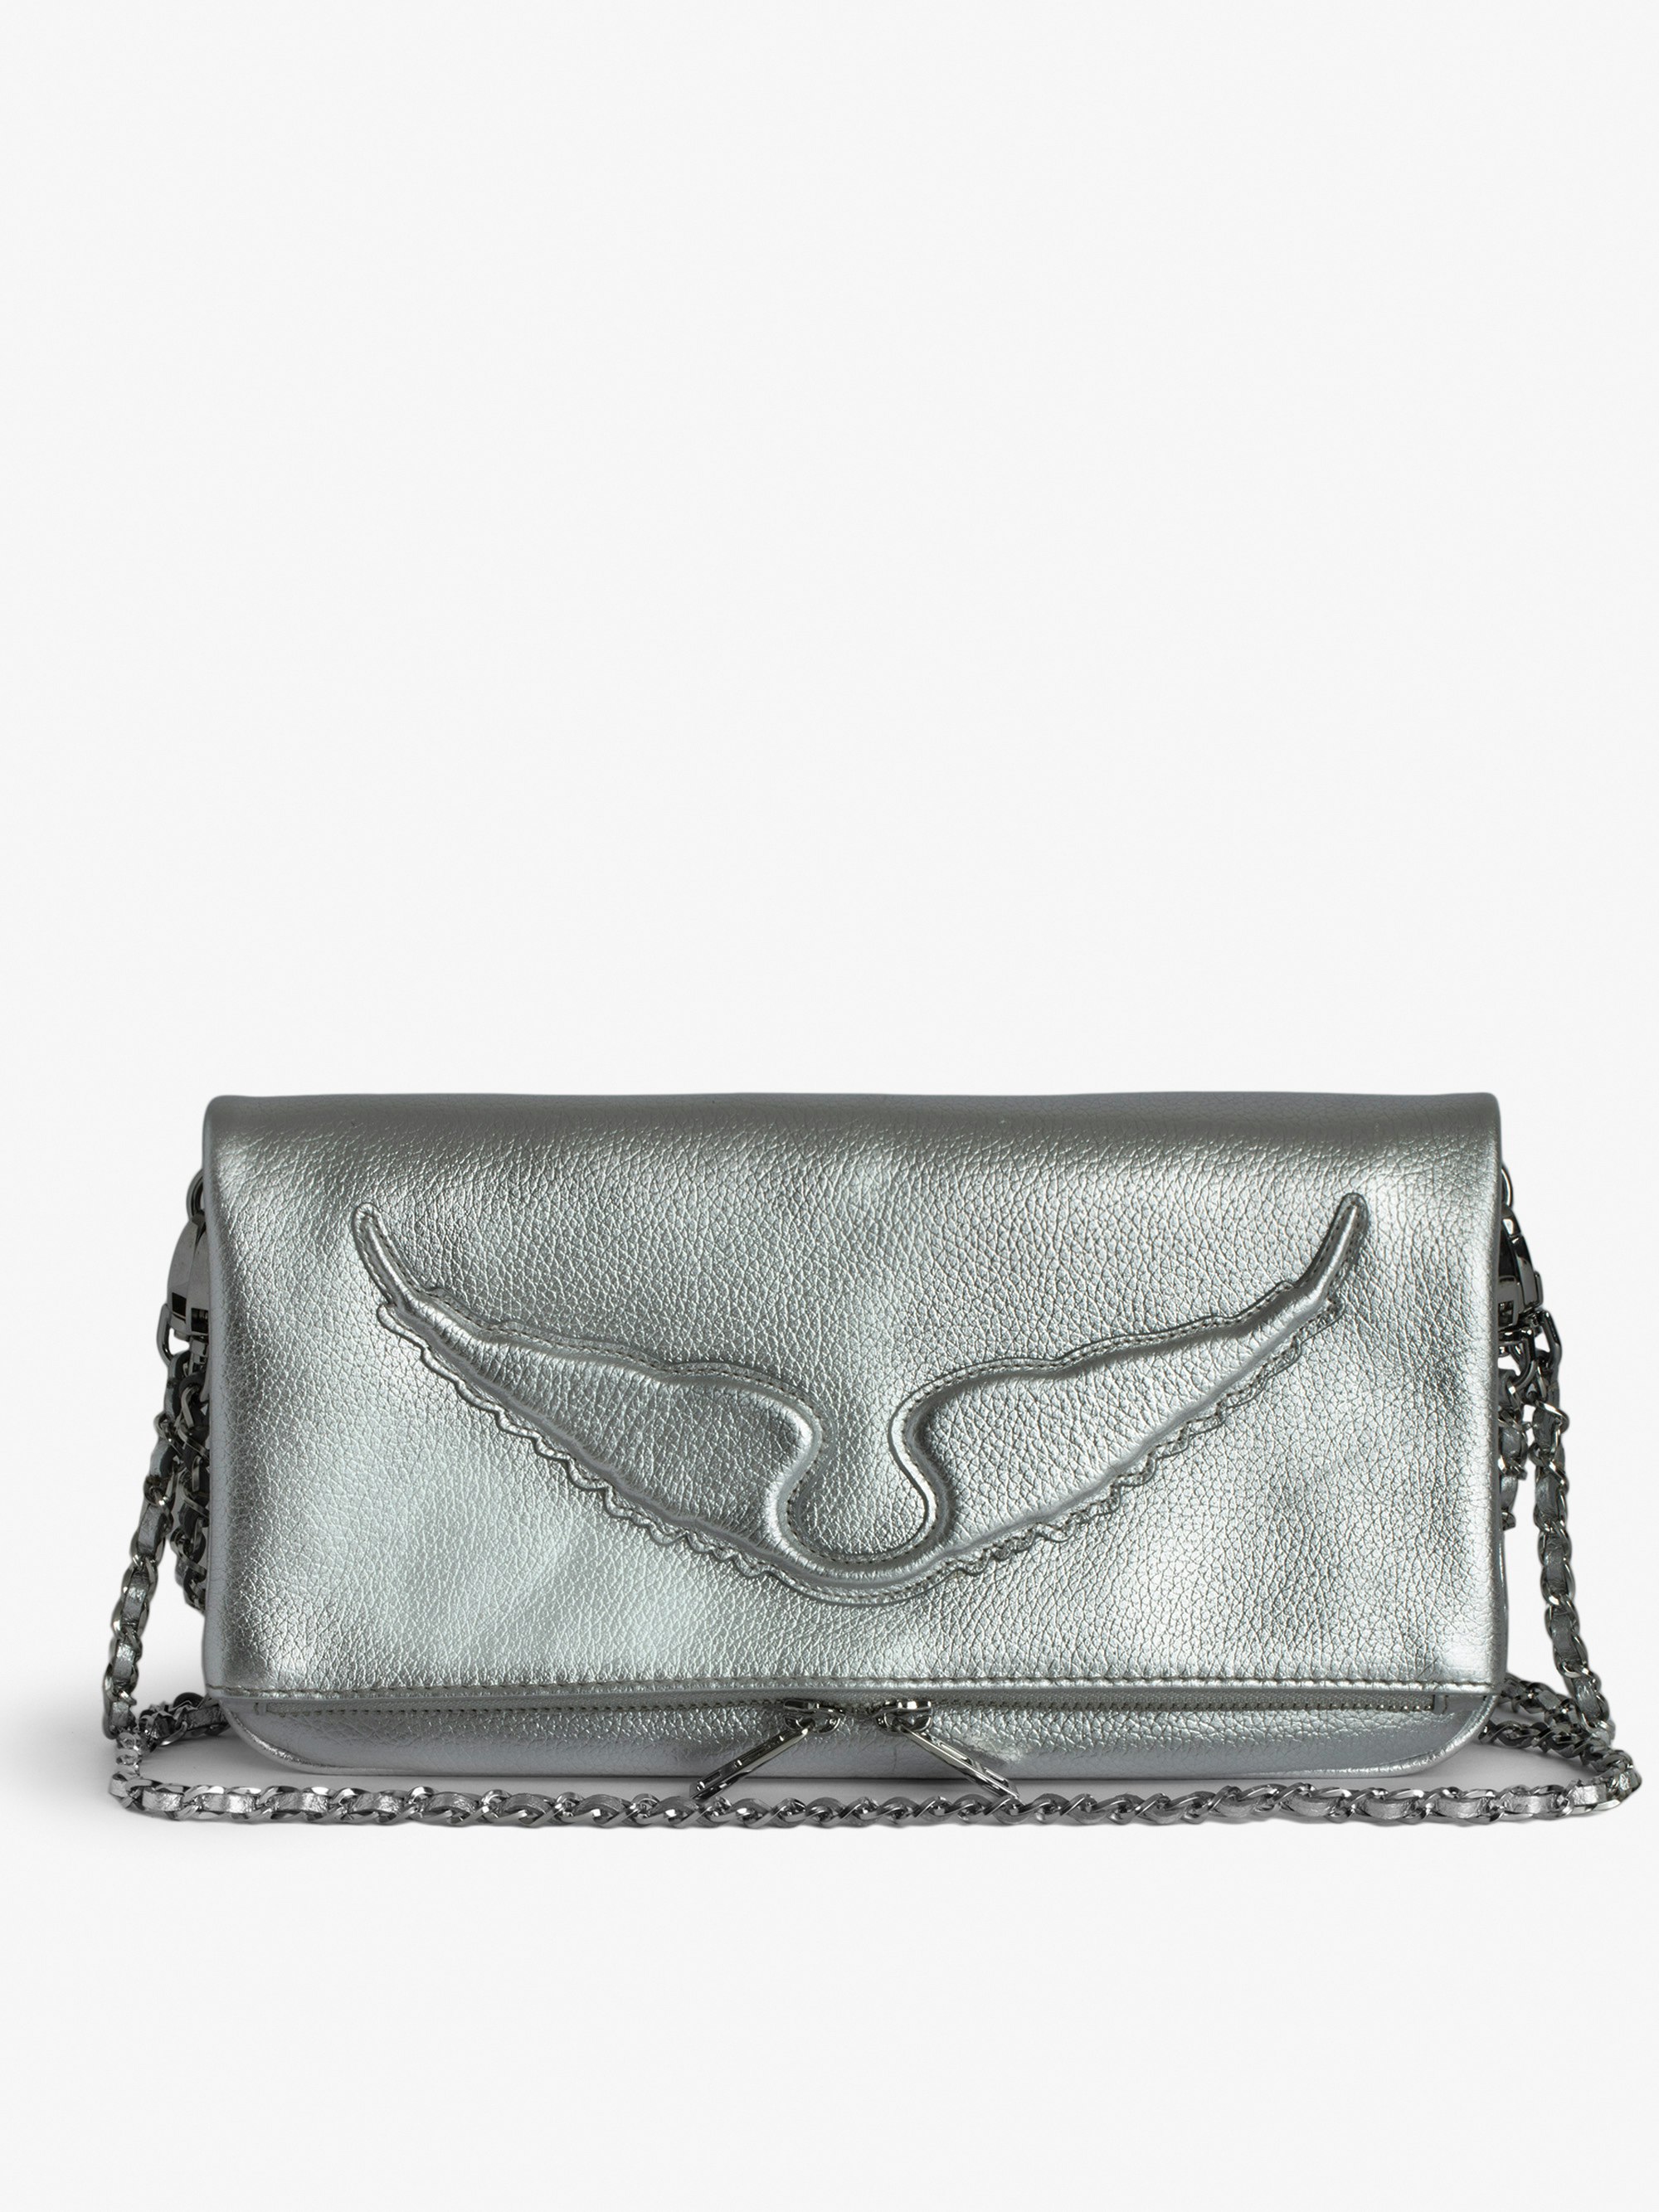 Rock Clutch - Silver-tone metallic grained leather clutch with double chain and signature embossed wings.